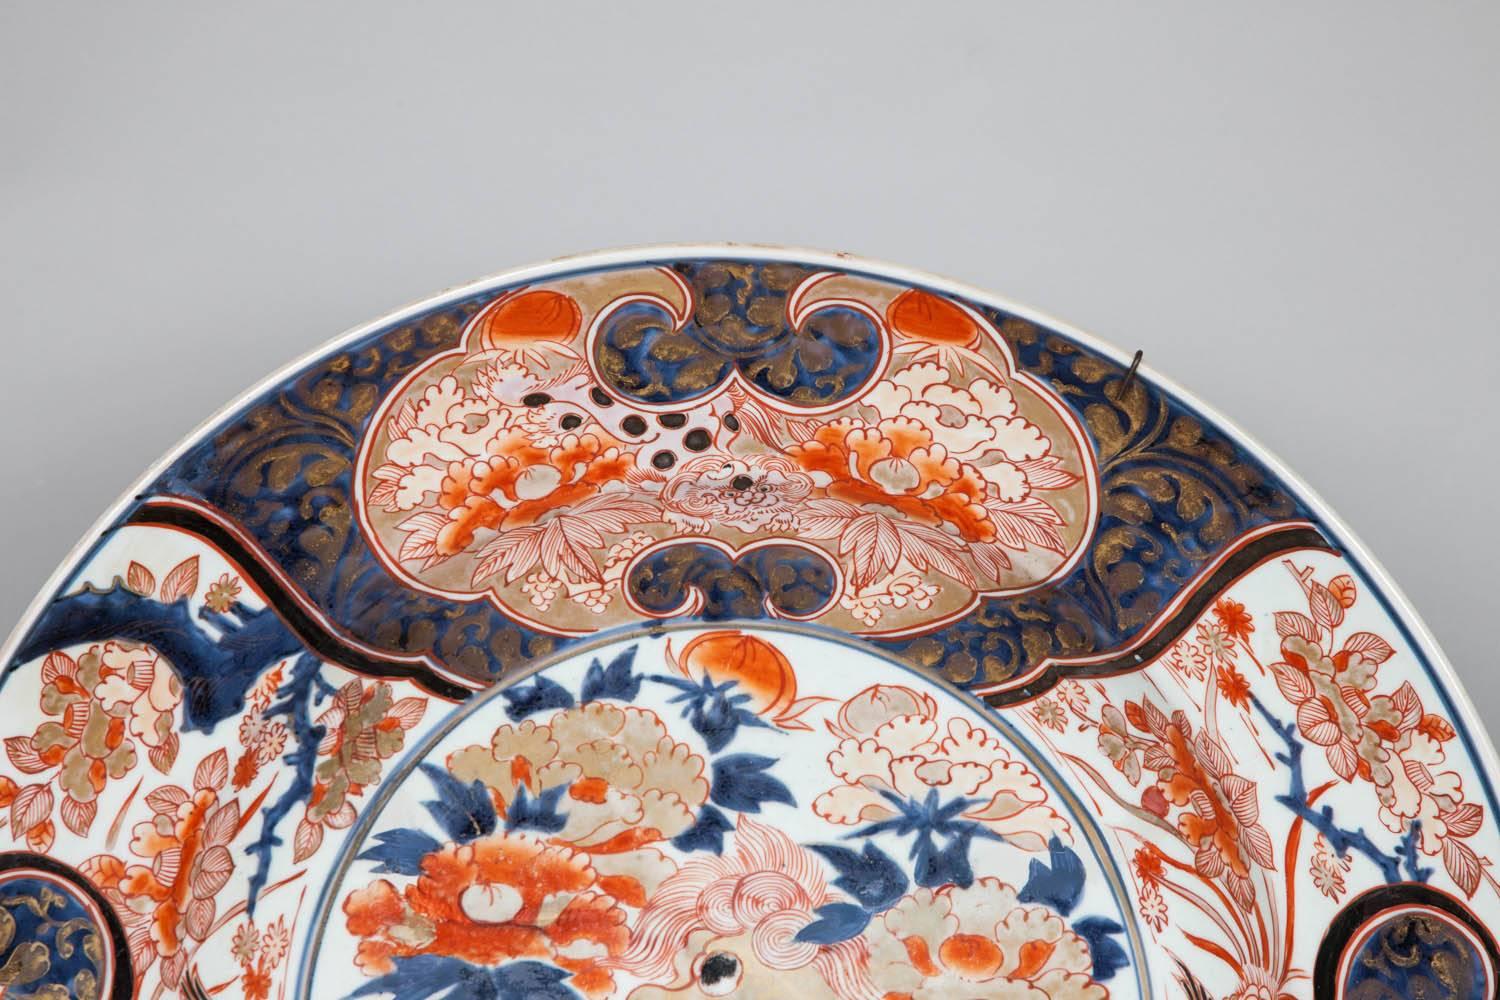 A richly decorated large imari charger from Japan, circa 1700. The centre with a composition of a kara shi-shi gambolling amongst flowers. The broad rim decorated with panels depicting further kara shi-shi lions at their leisure. The charger is